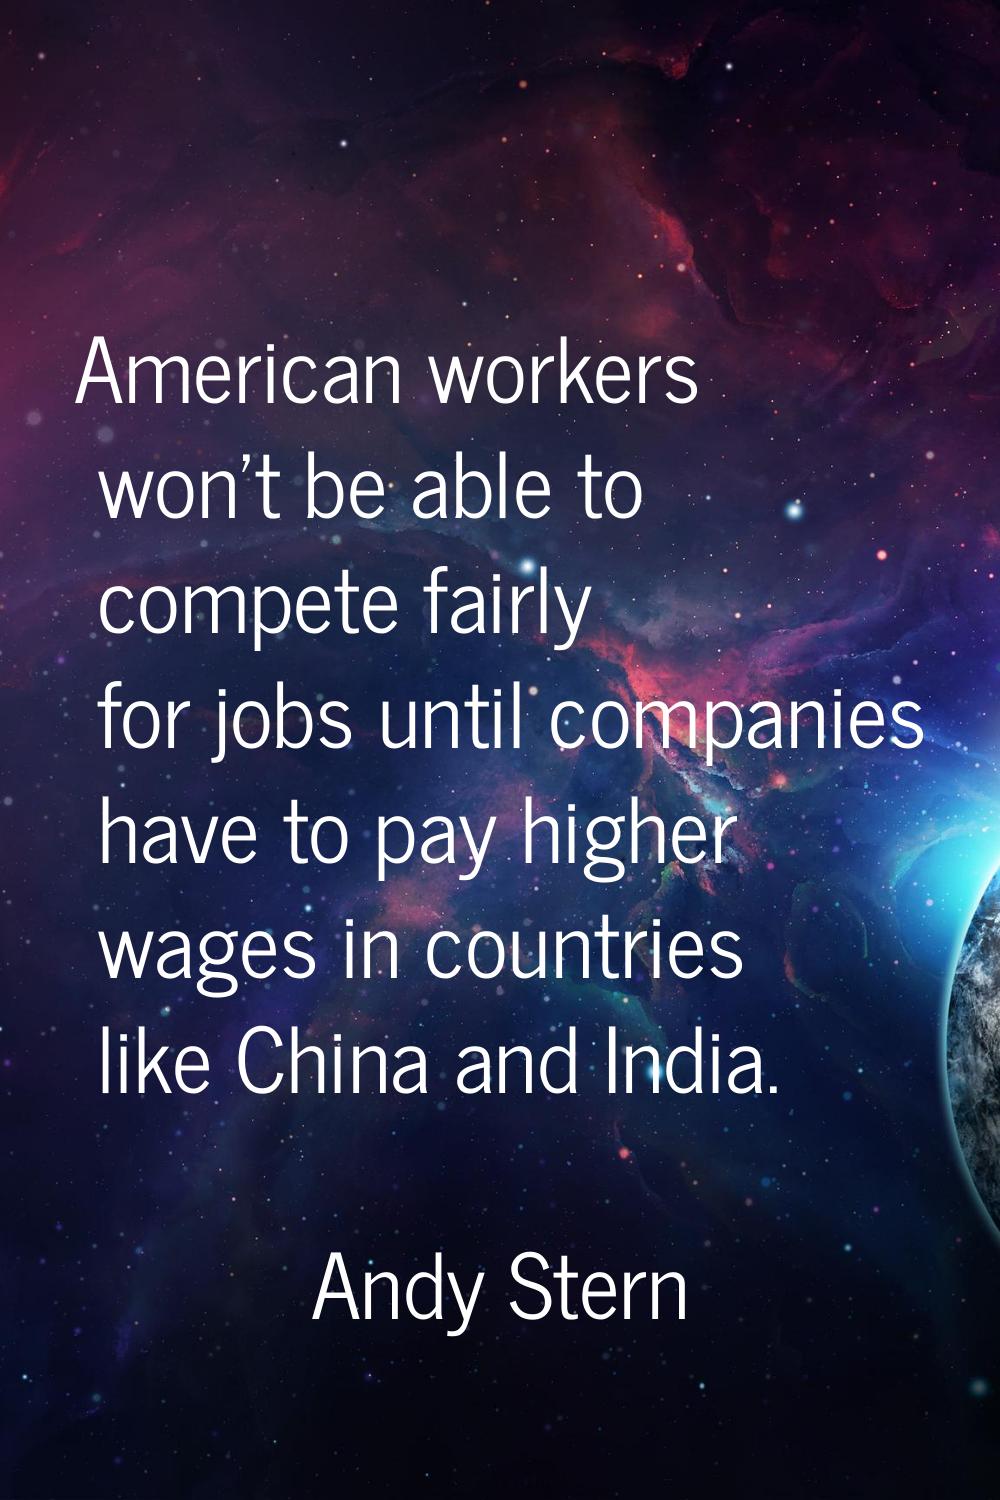 American workers won't be able to compete fairly for jobs until companies have to pay higher wages 